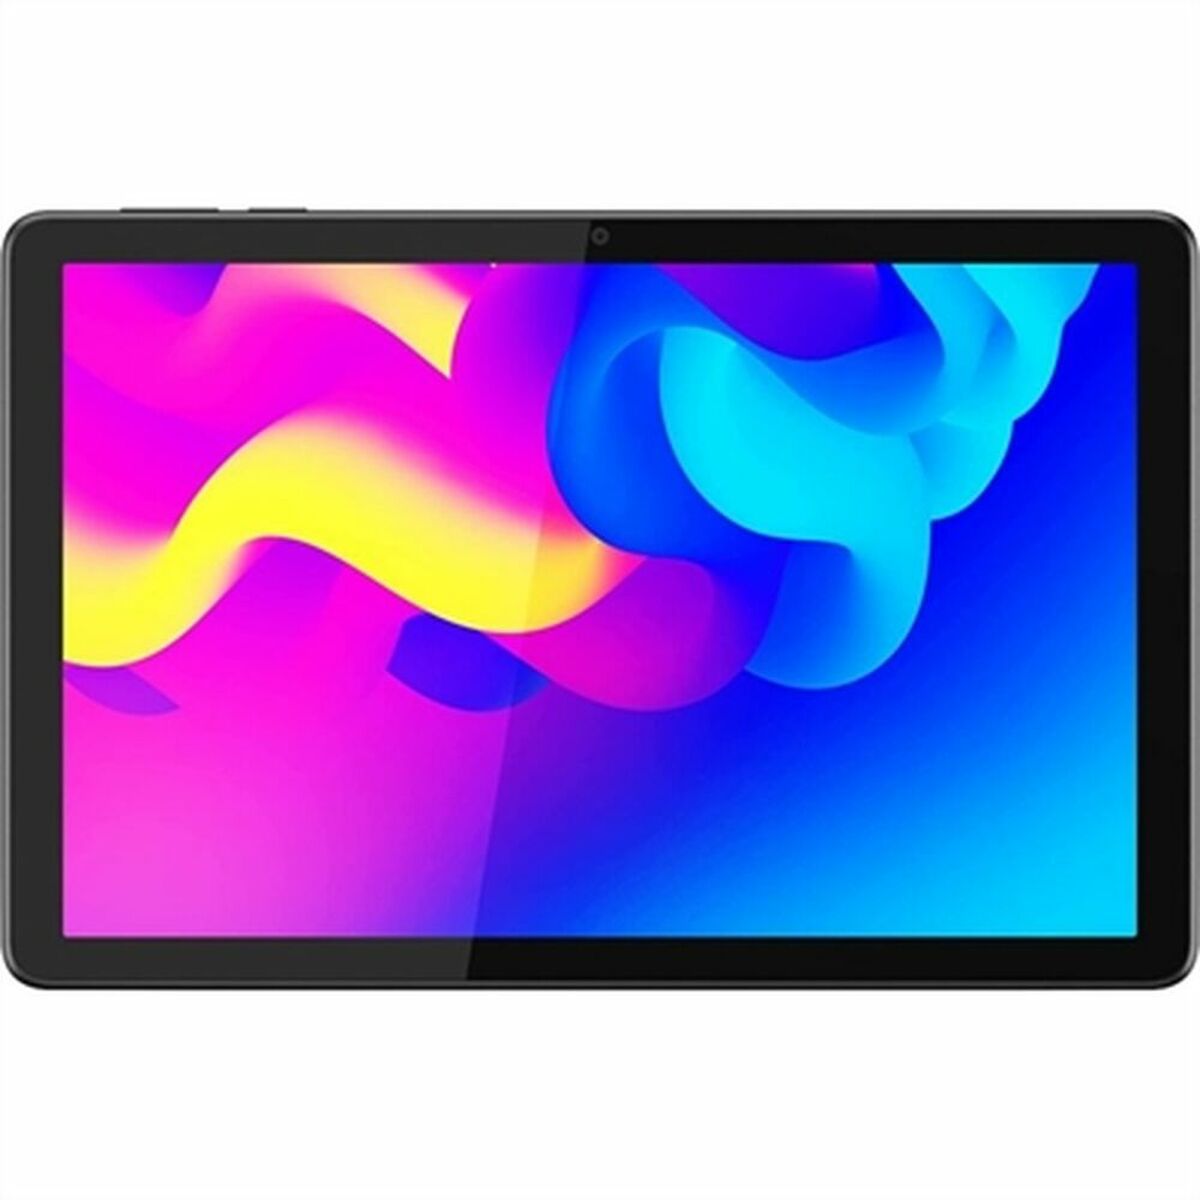 Tablet TCL Grey 10,1", TCL, Computing, tablet-tcl-grey-10-1, Brand_TCL, category-reference-2609, category-reference-2617, category-reference-2626, category-reference-t-19685, Condition_NEW, Price_100 - 200, telephones & tablets, Teleworking, RiotNook